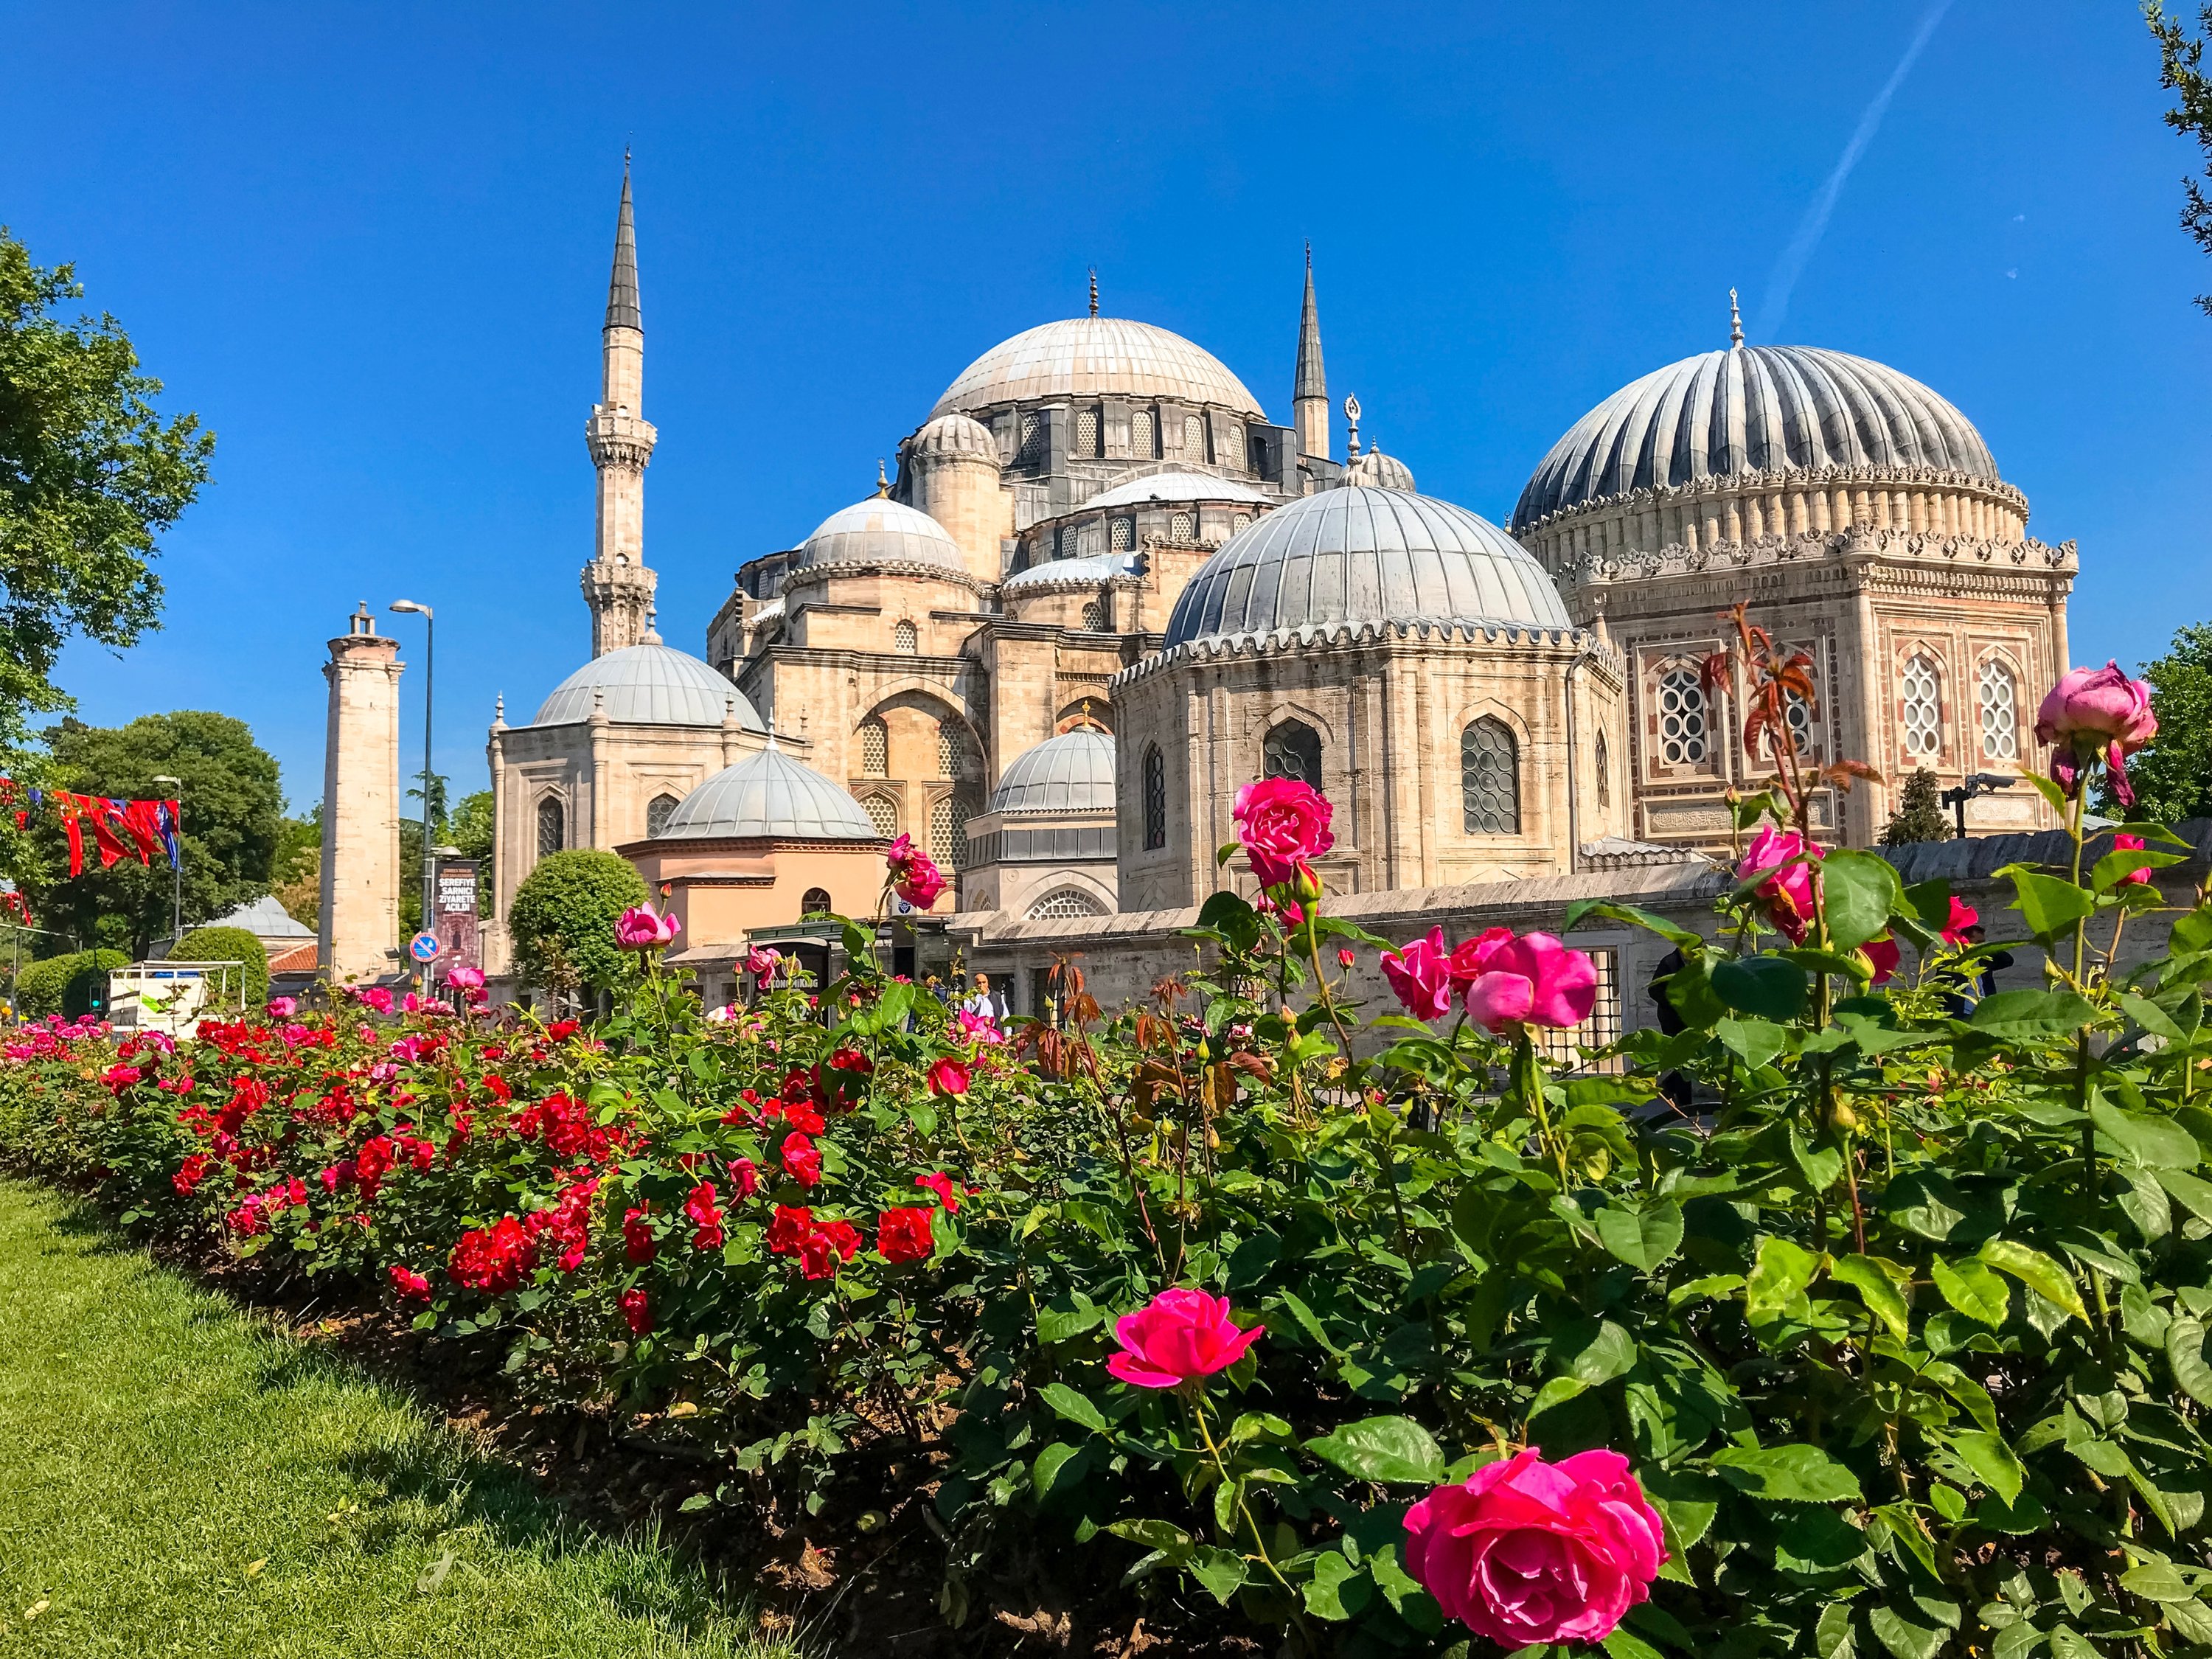 Exterior view of the Şehzade Mosque, commissioned by Ottoman Sultan Suleiman I, with roses in its garden in the Fatih district of Istanbul, Turkey, May 15, 2018. (Shutterstock Photo)